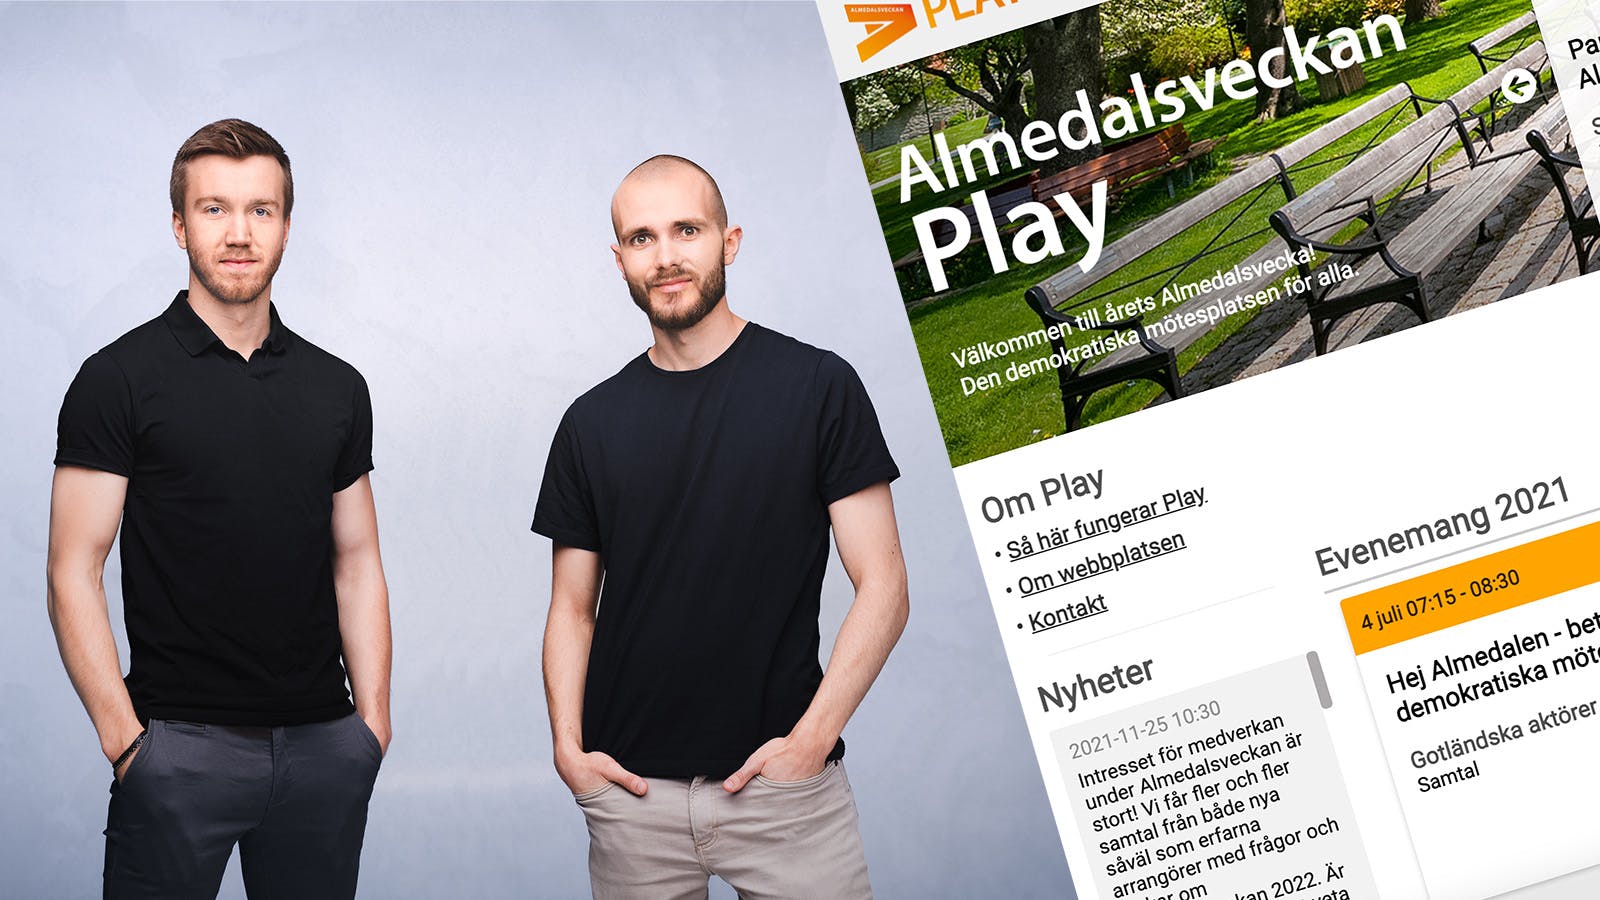 No one has escaped the fact that the latest upstart on the digital event scene is called Univid. With a brand new investment in the bag, it is now clear that Univid secures an agreement of 2 + 1 years to continue to deliver the play channel to one of the world's largest political gatherings - Almedalen Week.